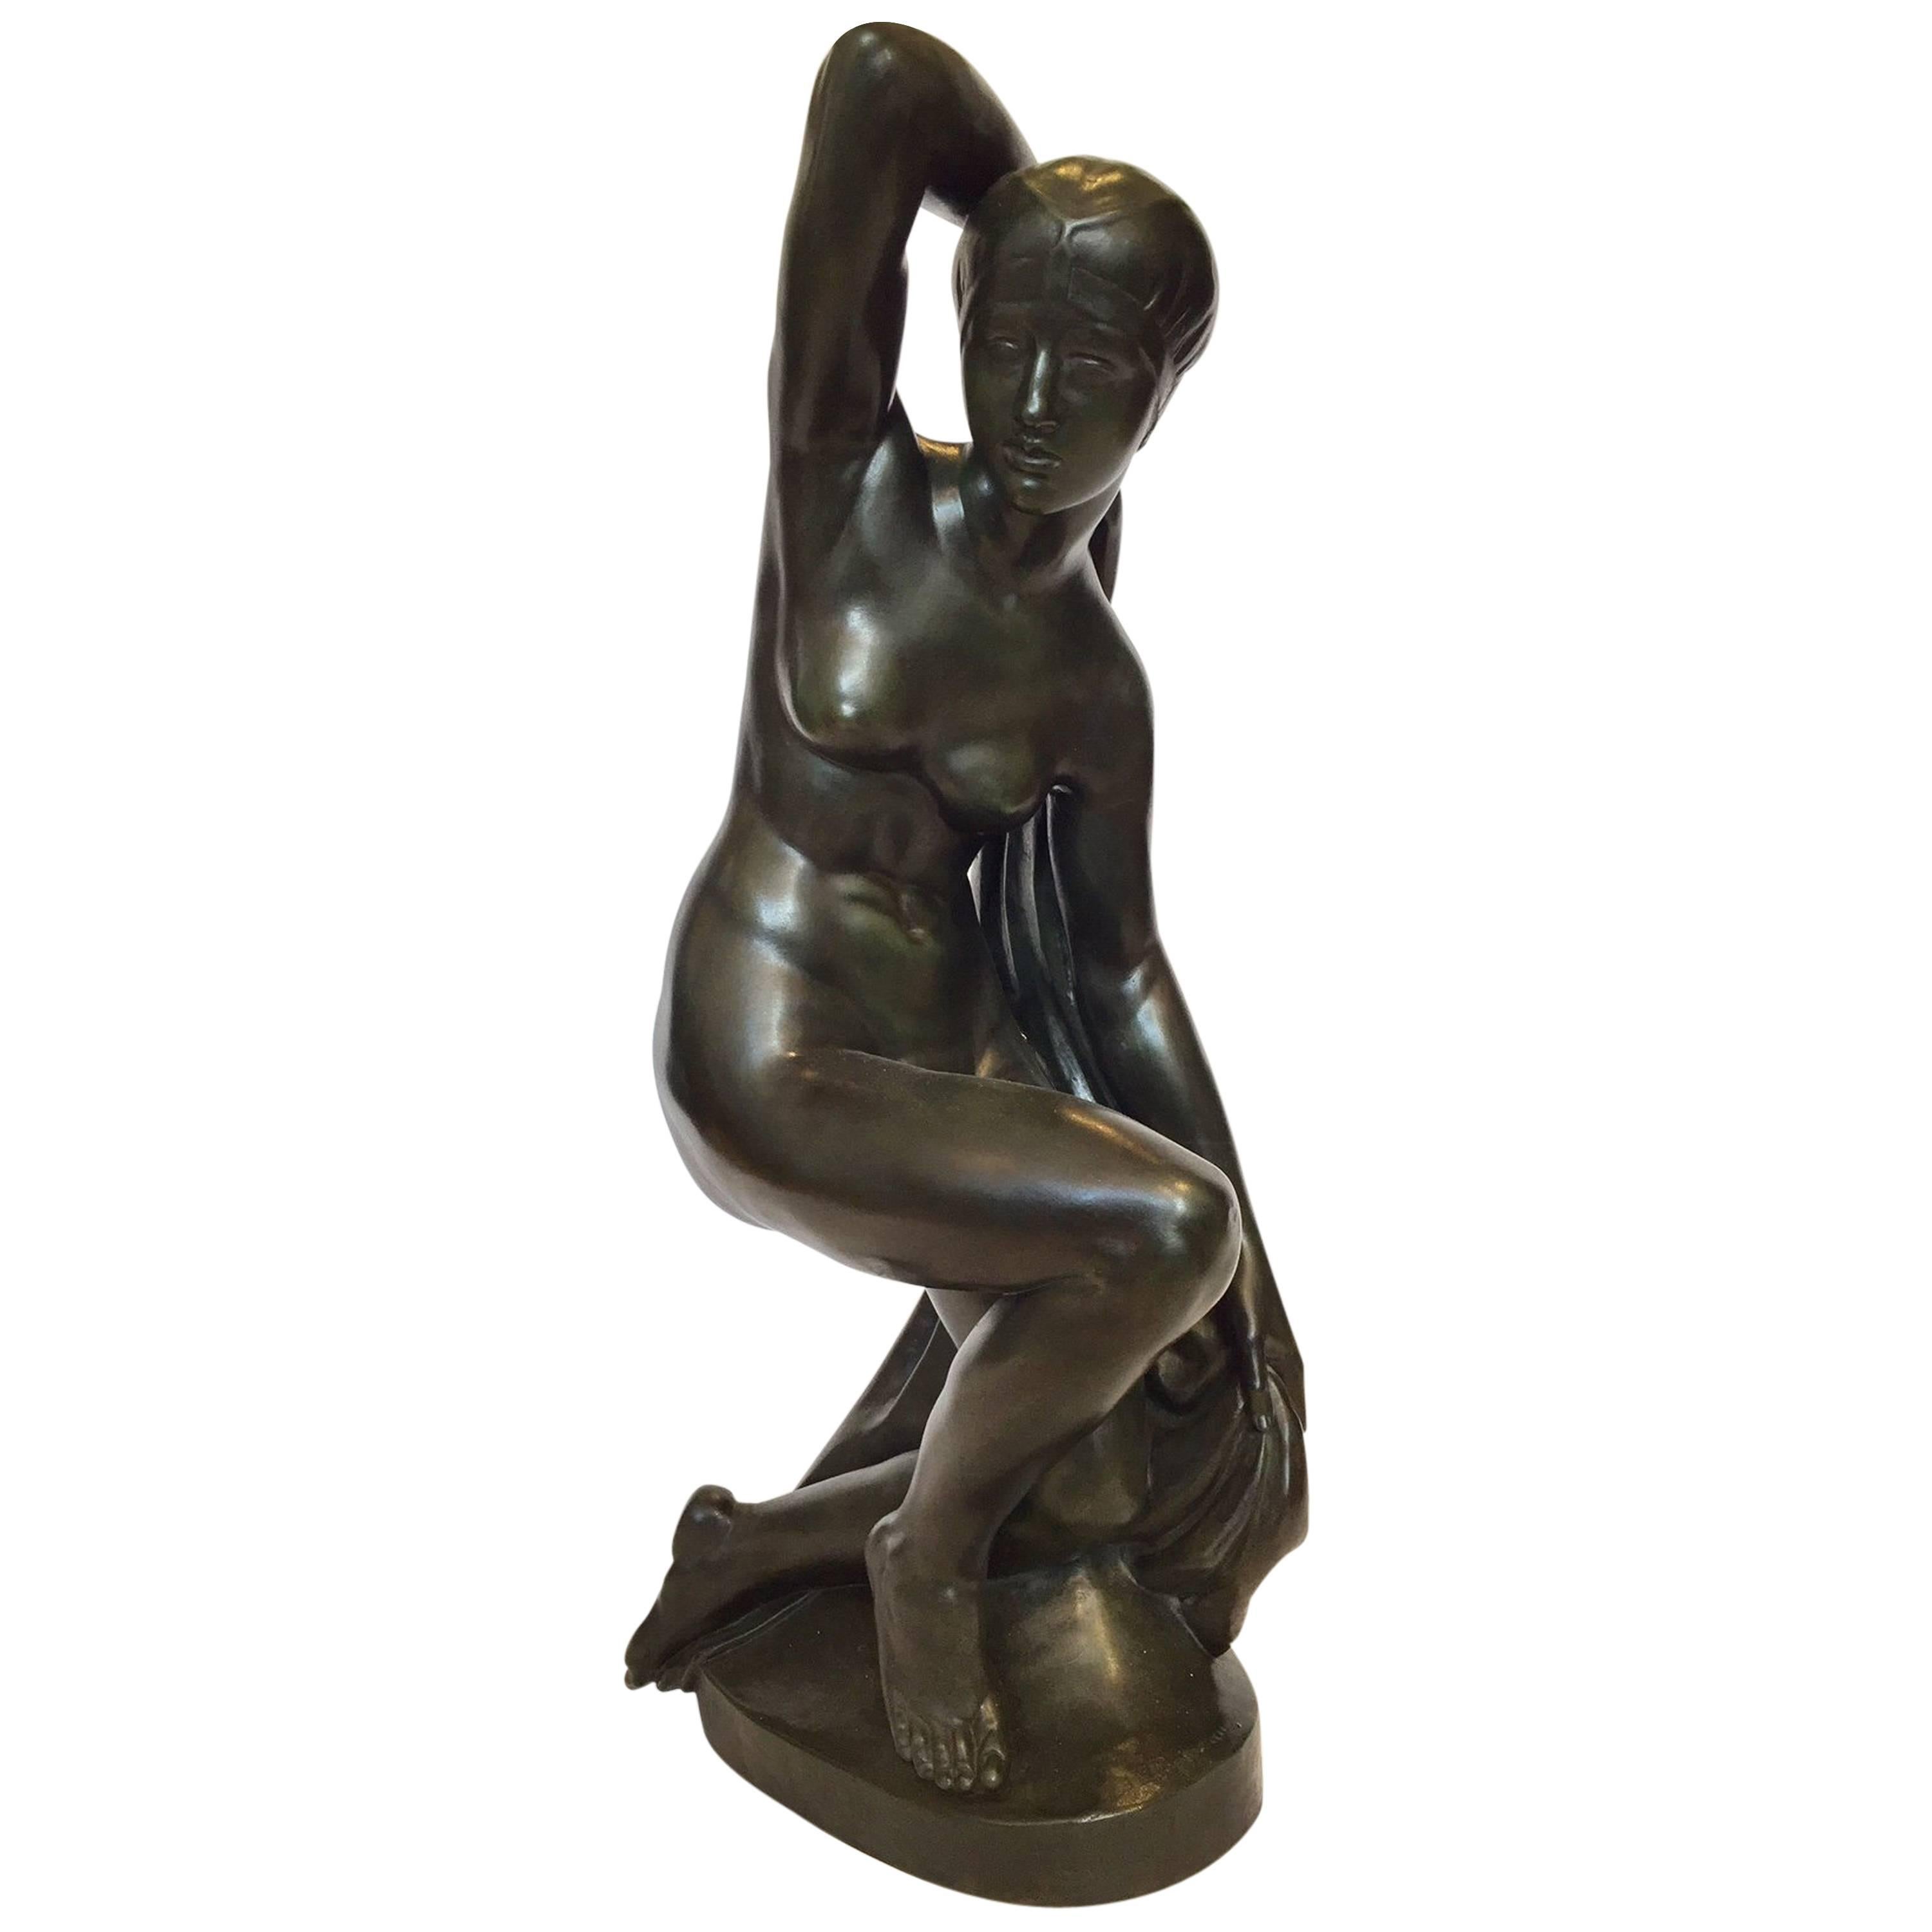 Popineau 1930s Art Deco Large Bronze Sculpture "Draped Naked Young Woman" For Sale